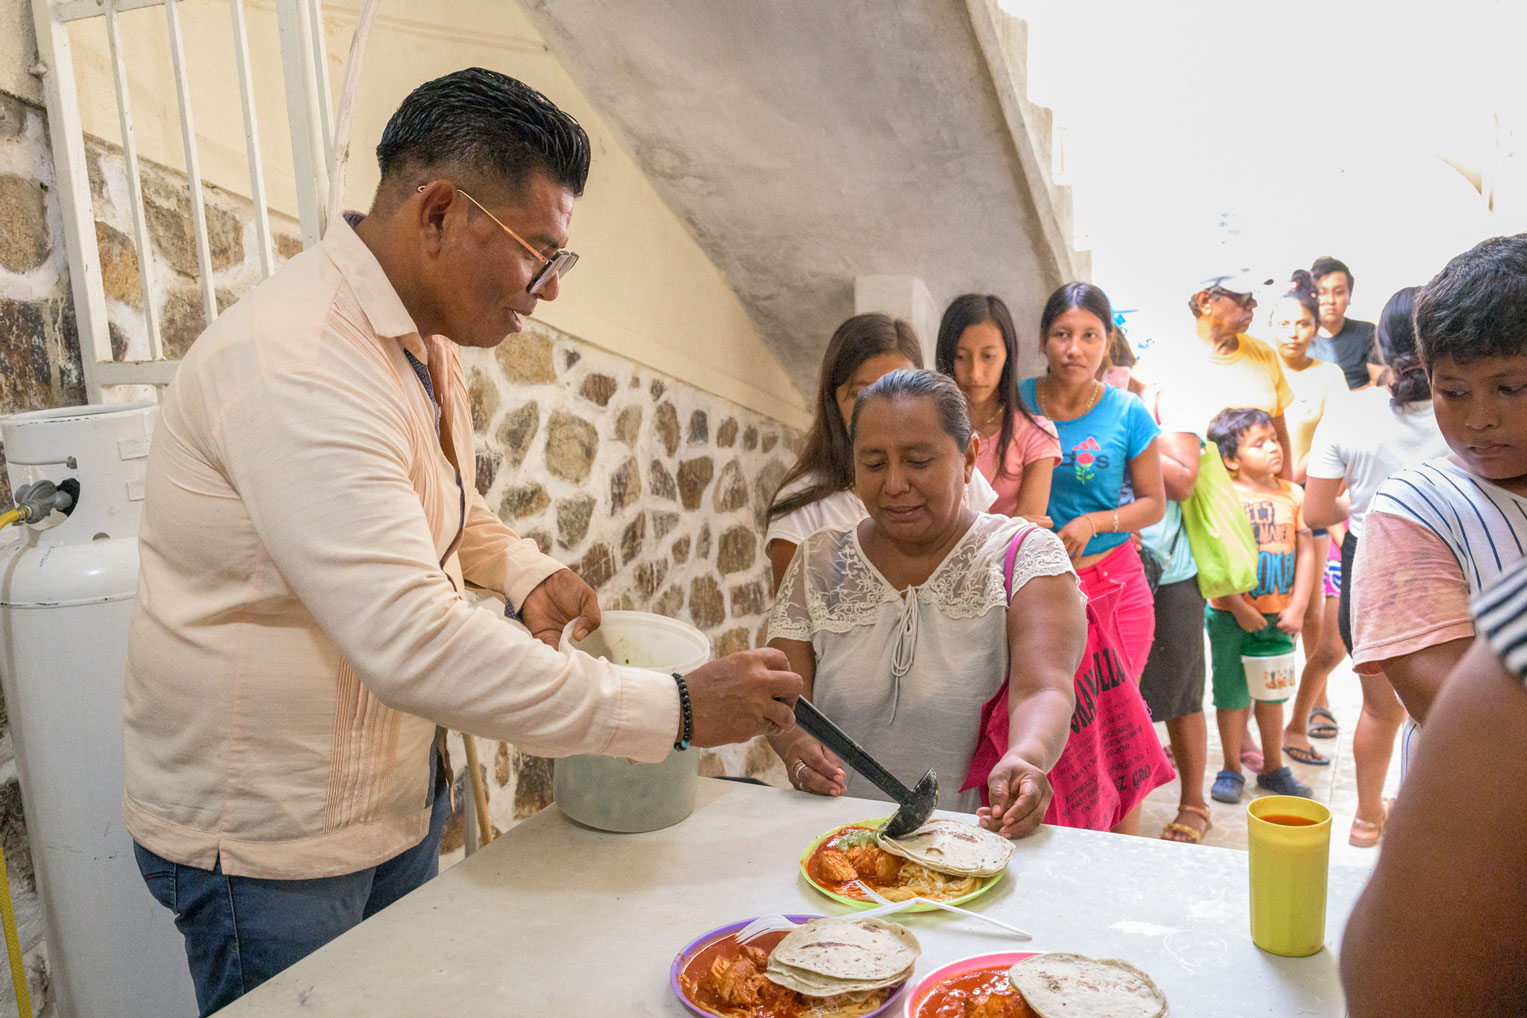 Through local churches, like that of Pastor Pedro Molina, are working hard to serve their communities still hurting after the storm.